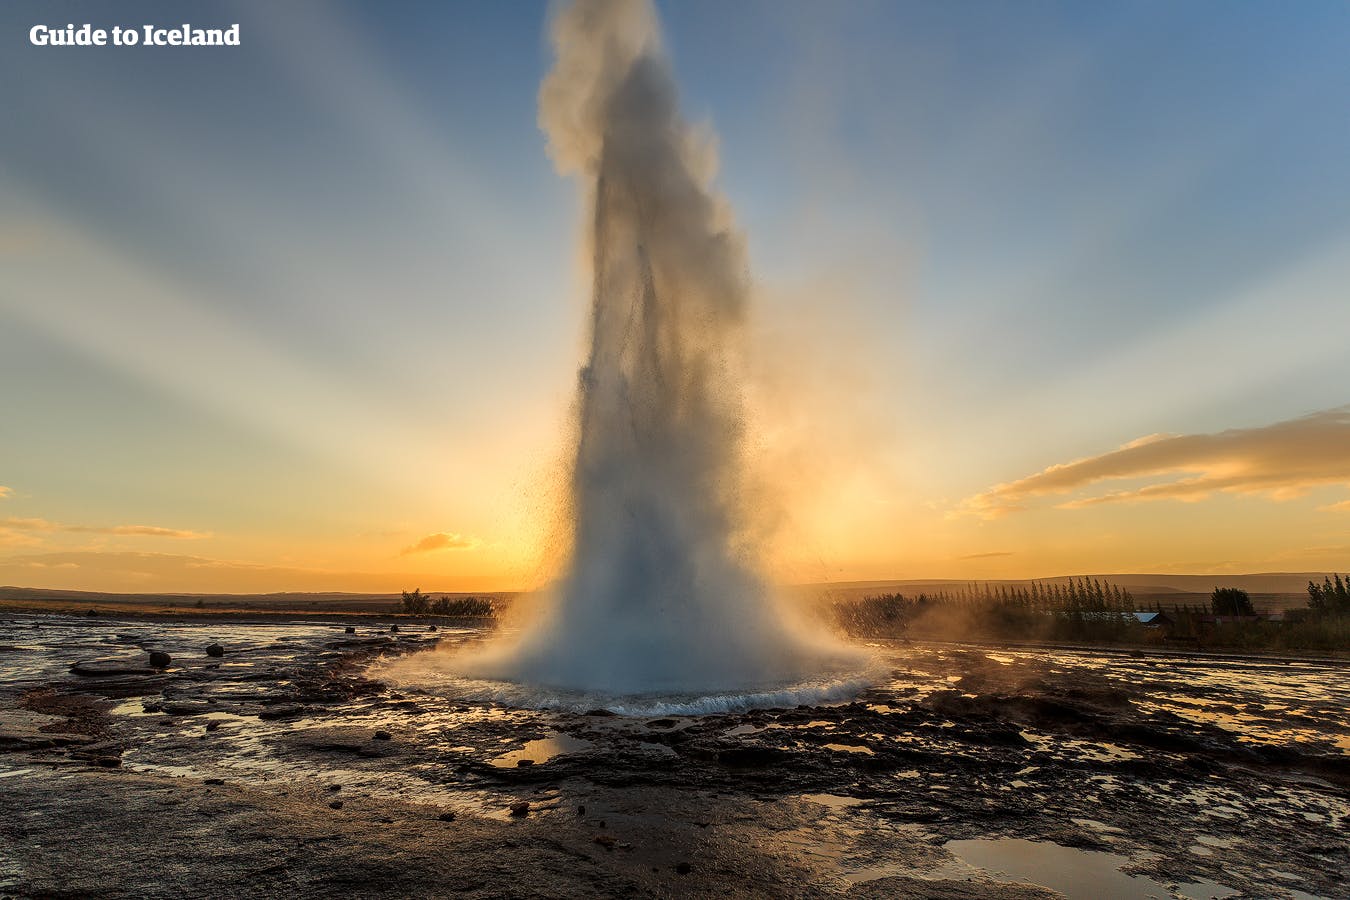 Strokkur geyser erupts every few minutes, sometimes reaching heights of 60 m (197 ft).